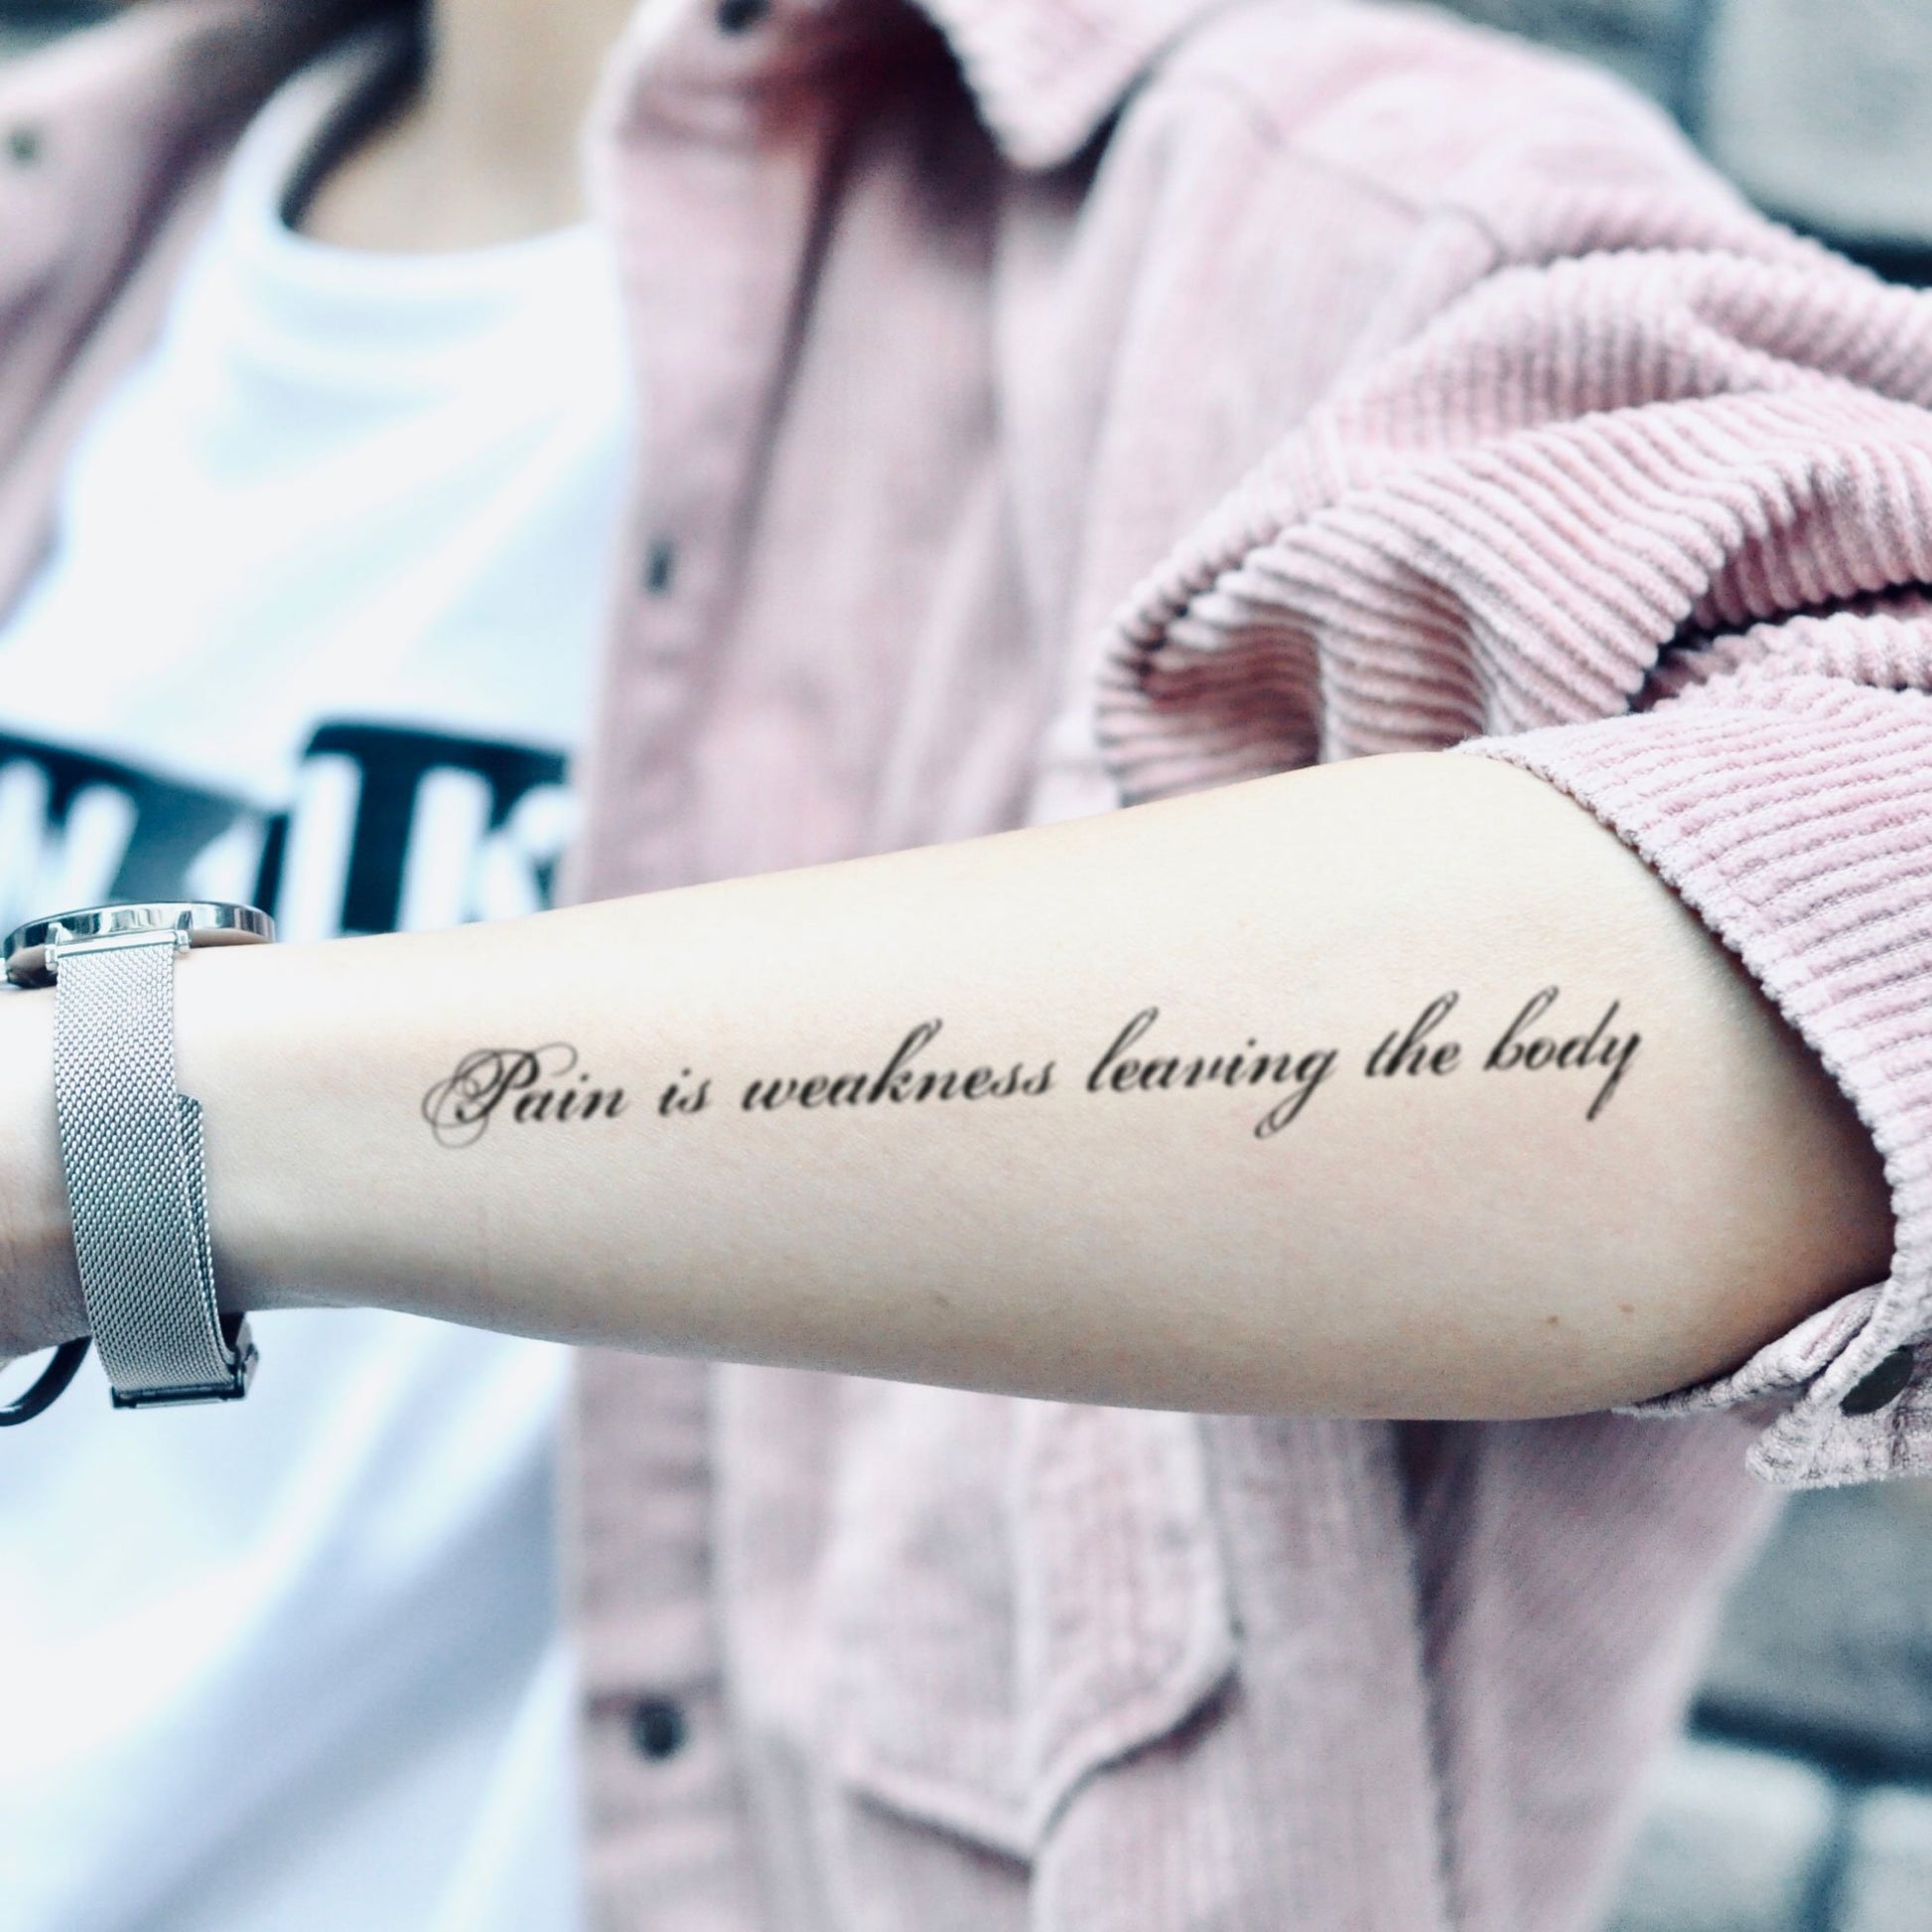 fake medium pain is weakness leaving the body quote lettering temporary tattoo sticker design idea on forearm